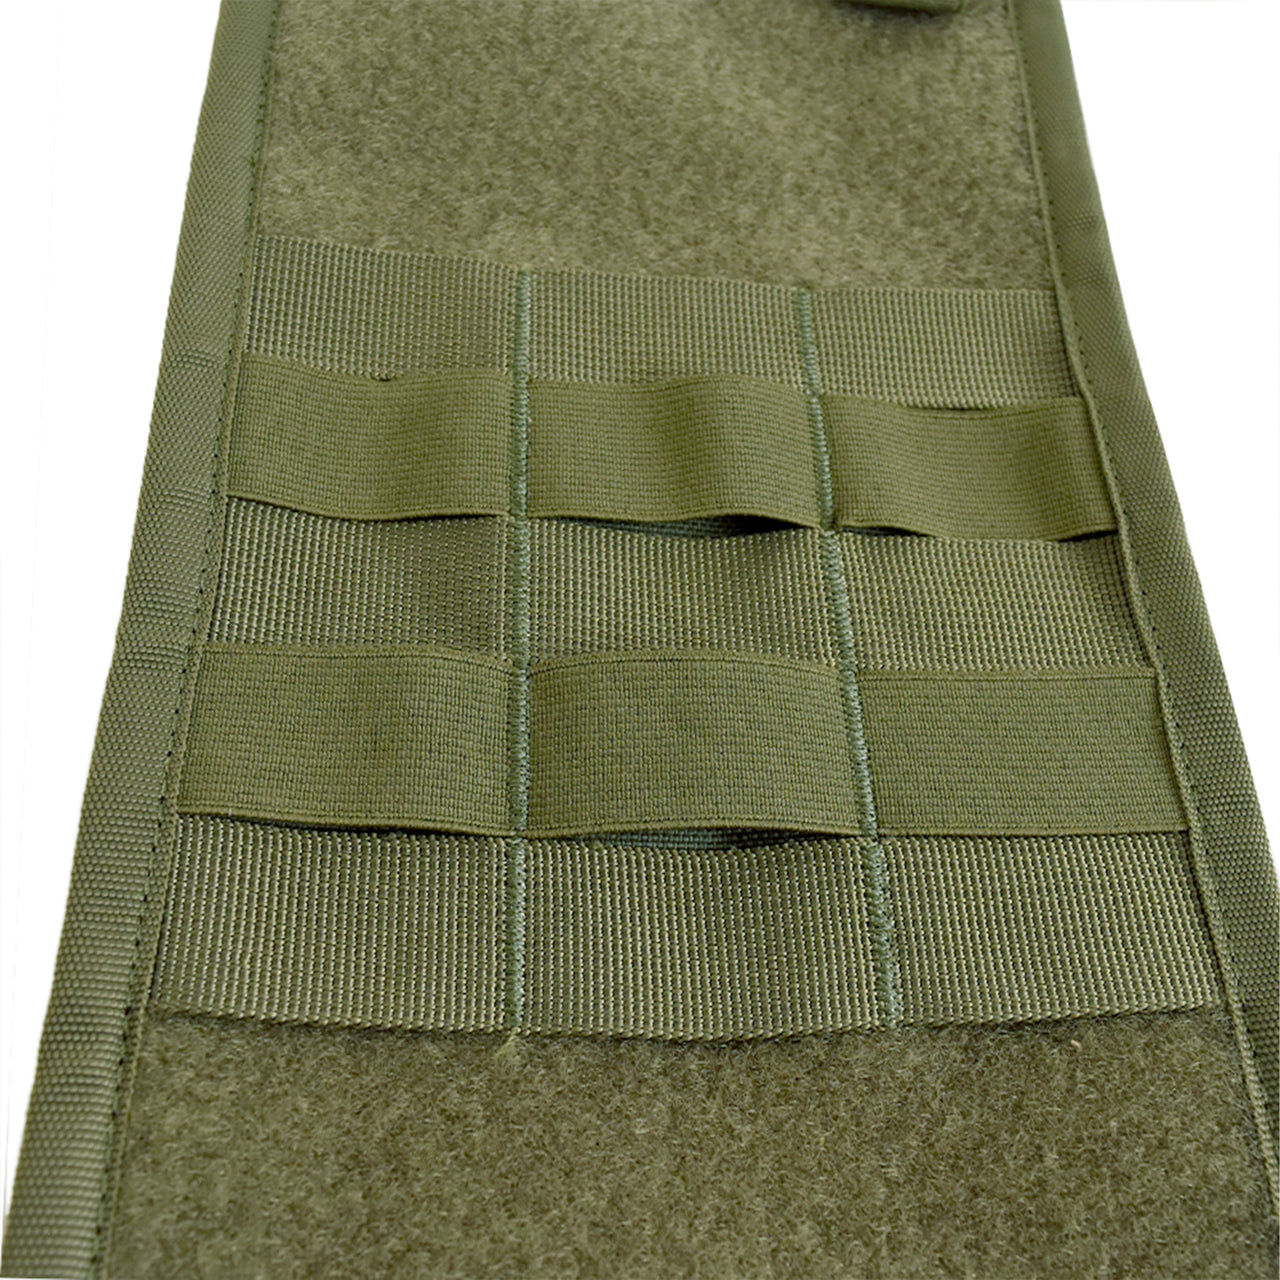 MOLLE Car Visor Organiser with Double Loop Patches - Olive Green